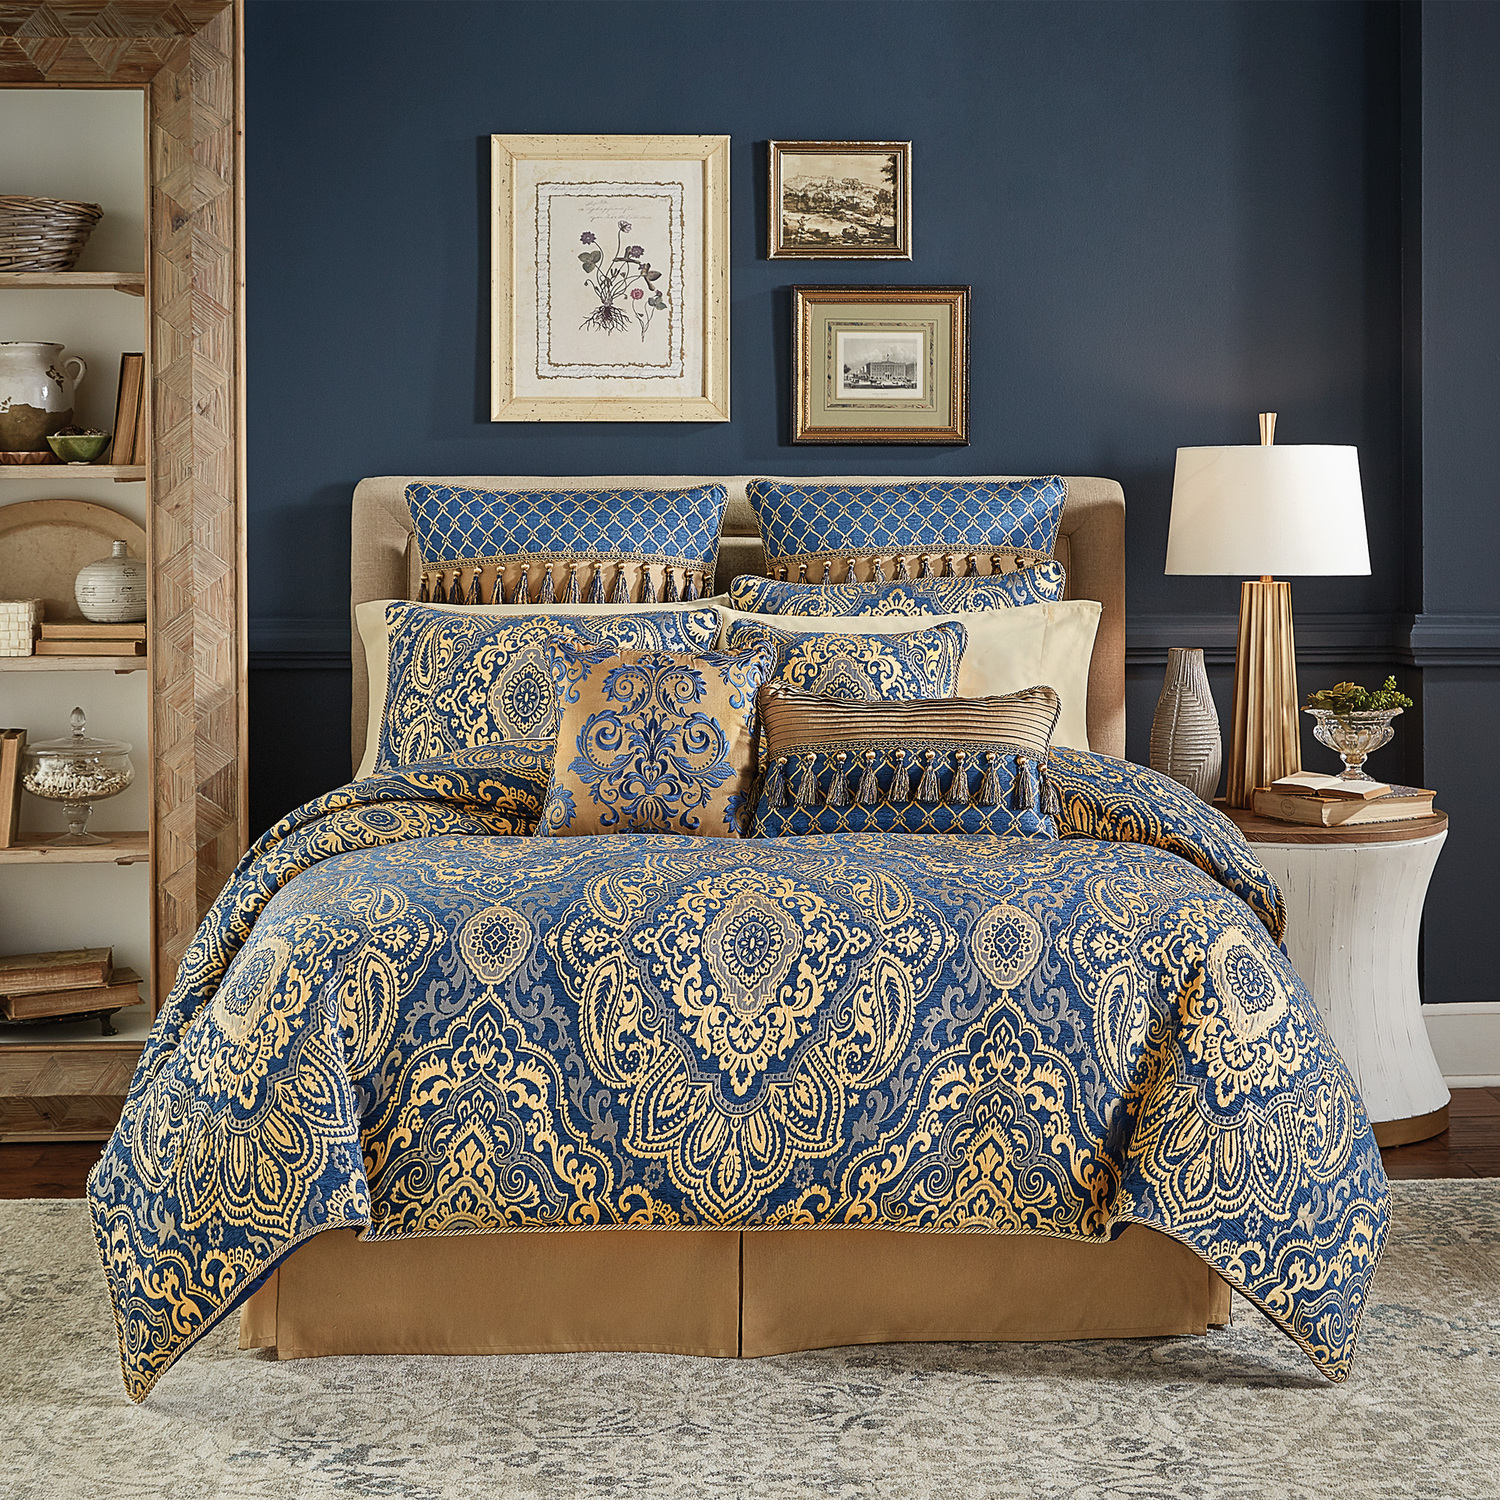 Allyce by Croscill Home Fashions - BeddingSuperStore.com